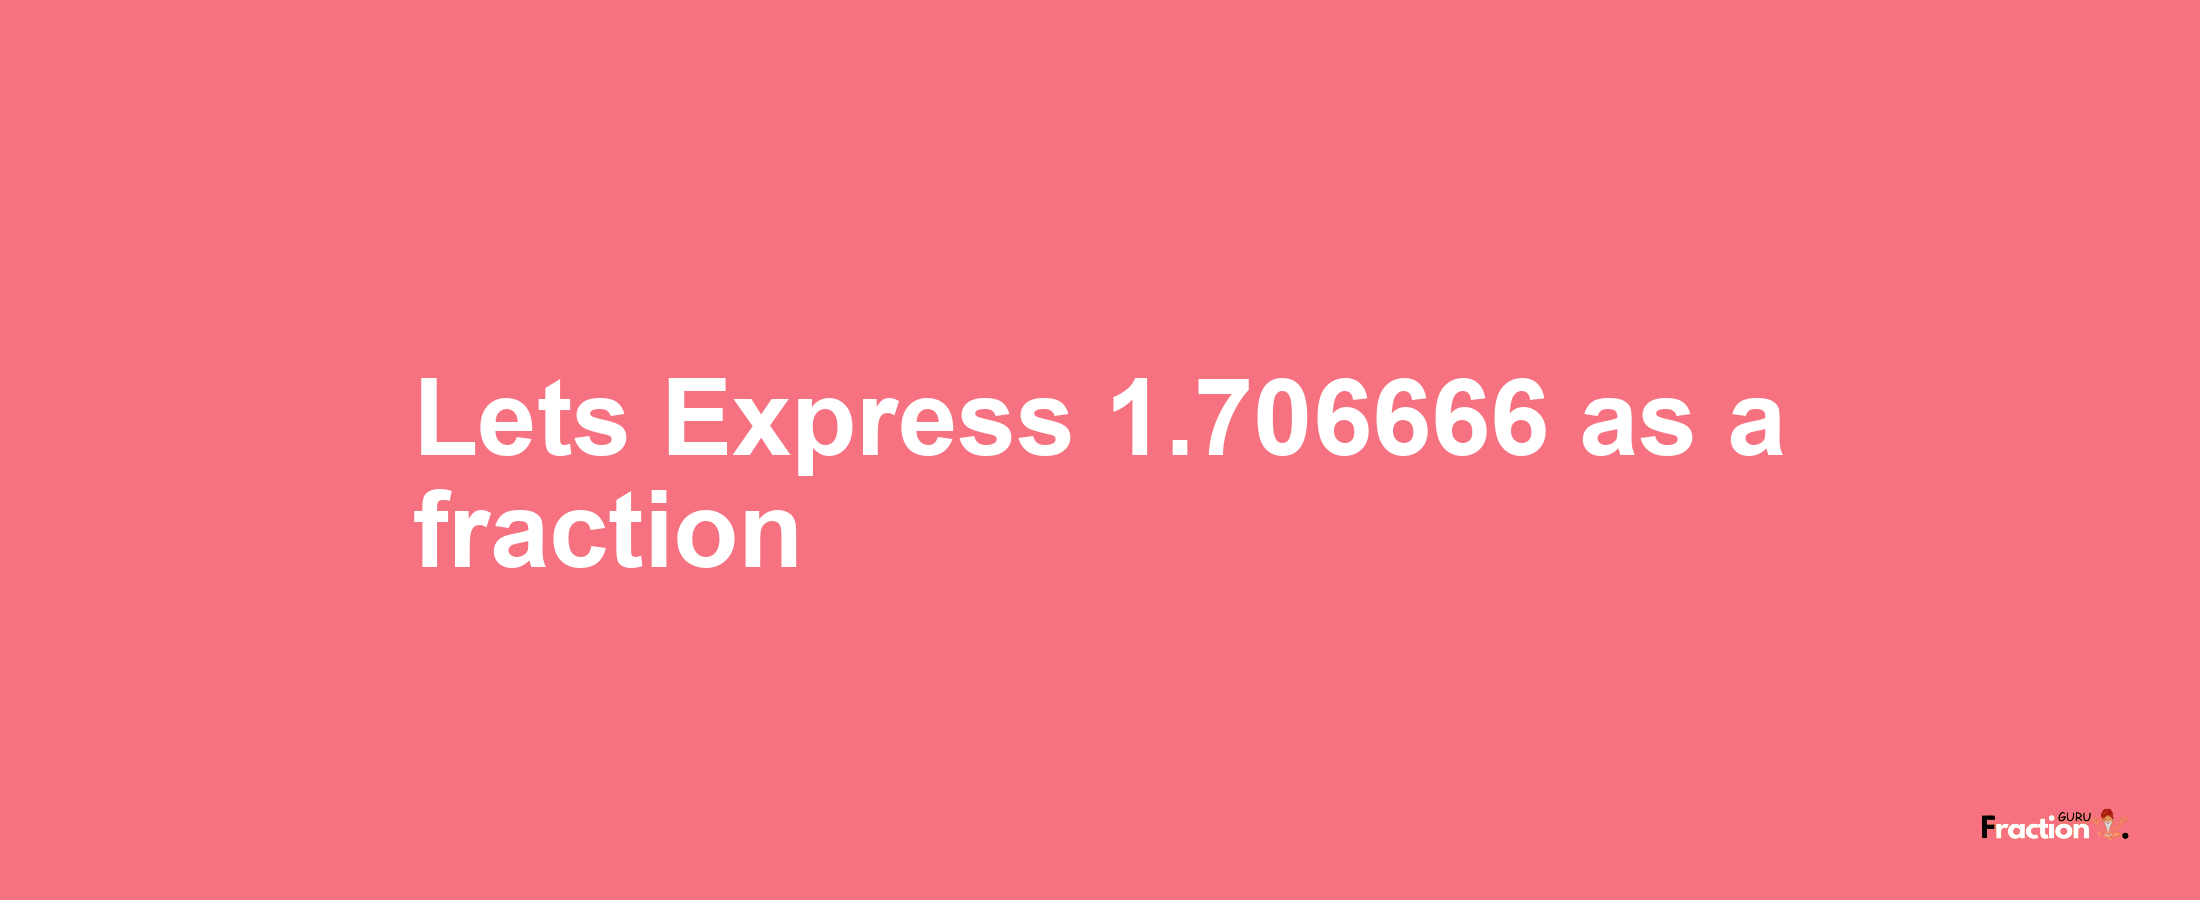 Lets Express 1.706666 as afraction